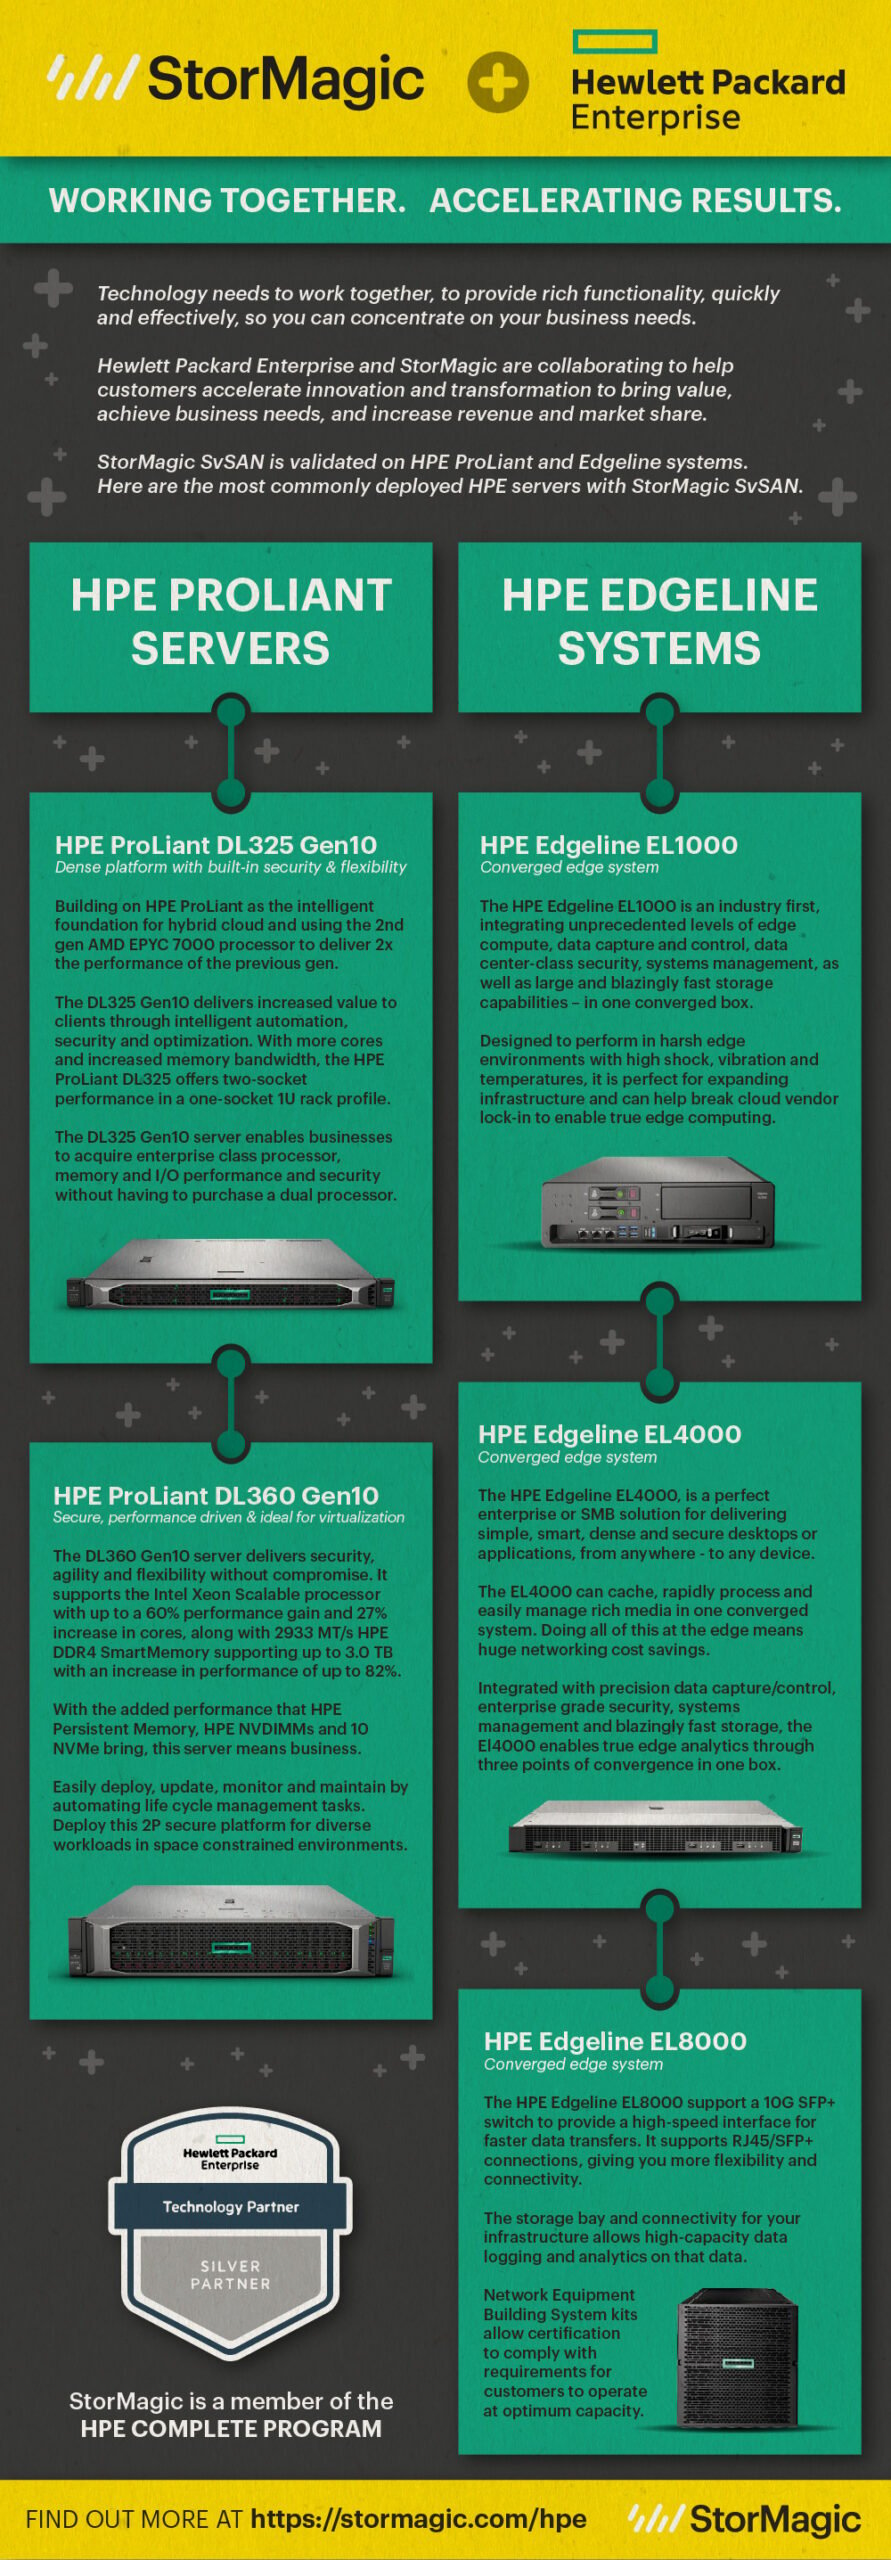 SvSAN with HPE Infographic